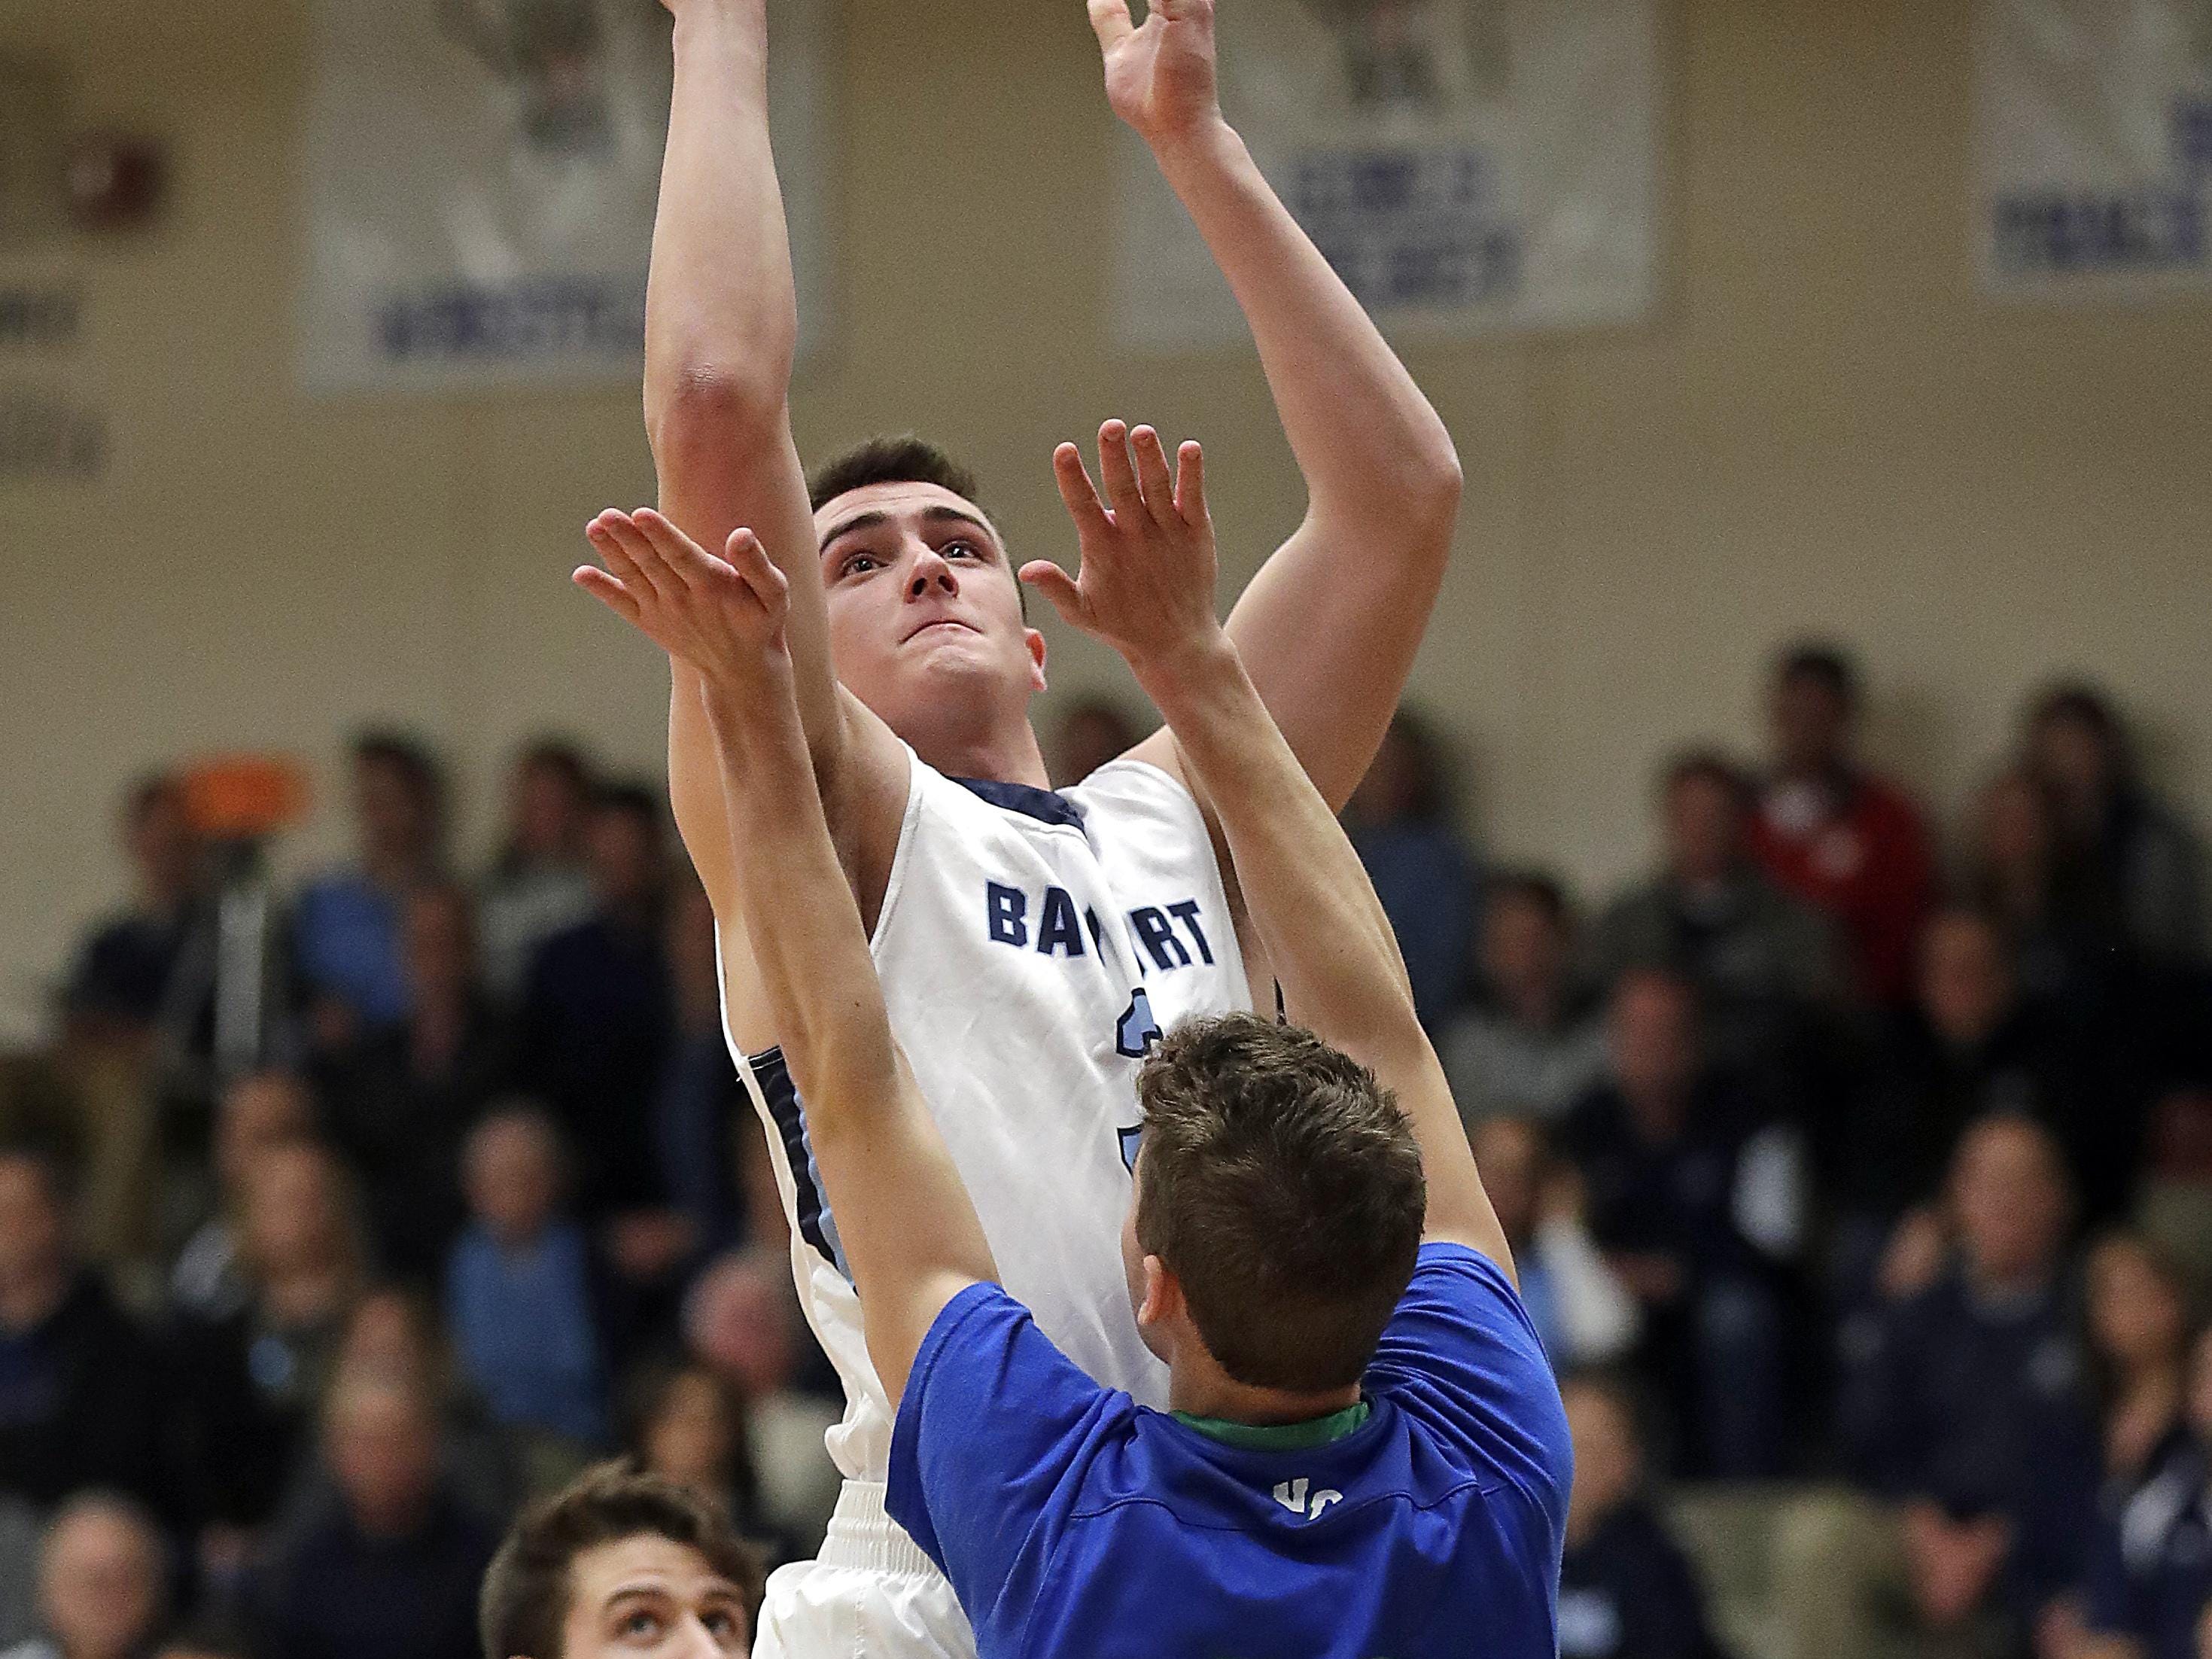 Bay Port guard Jacob Stratman goes up for a basket over Notre Dame’s Reese Johnson during FRCC action at Bay Port High School on Thursday.